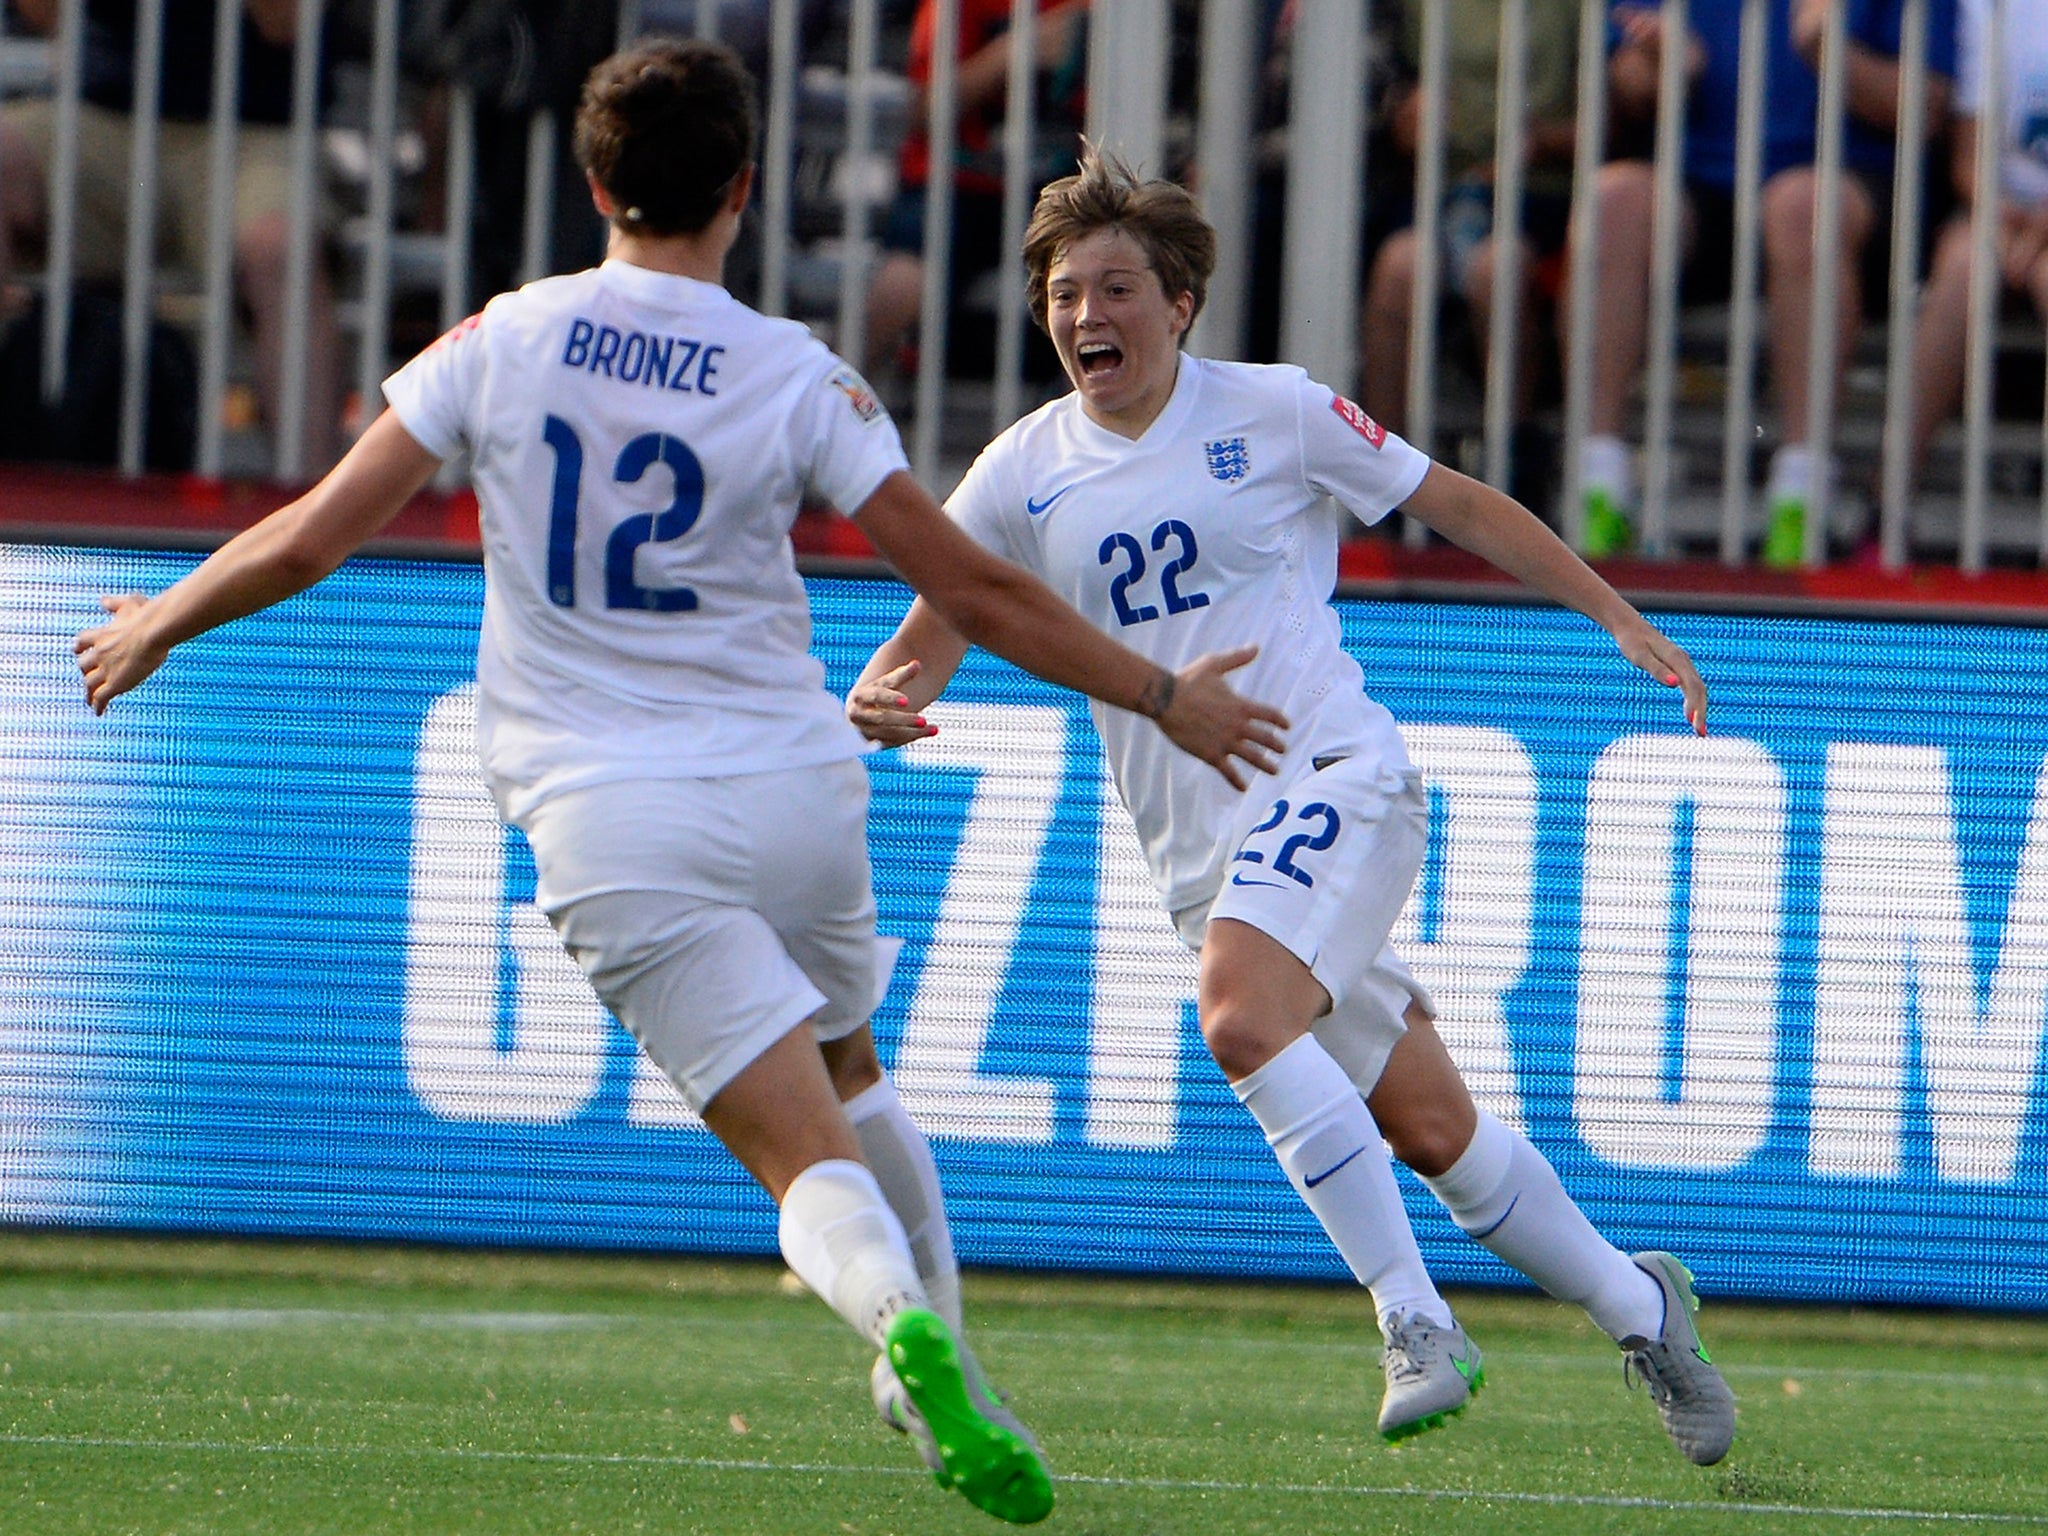 An exultant Fran Kirby wheels away in celebration after scoring England’s opening goal